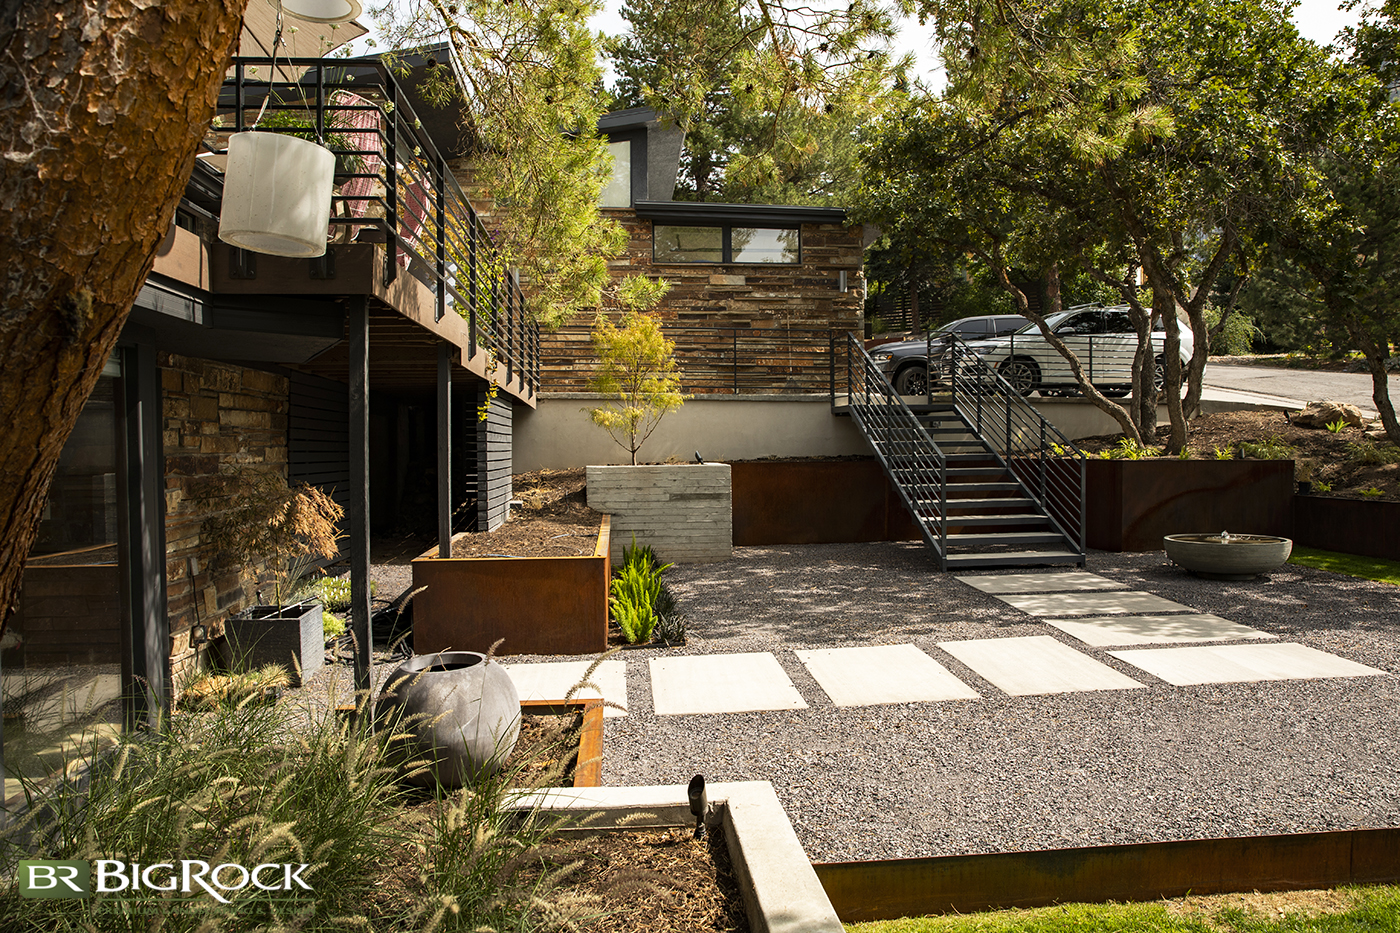 With a passion for creating the outdoor space of your dreams, Big Rock Landscaping can help you design the ideal garden and surrounding landscape for your space.